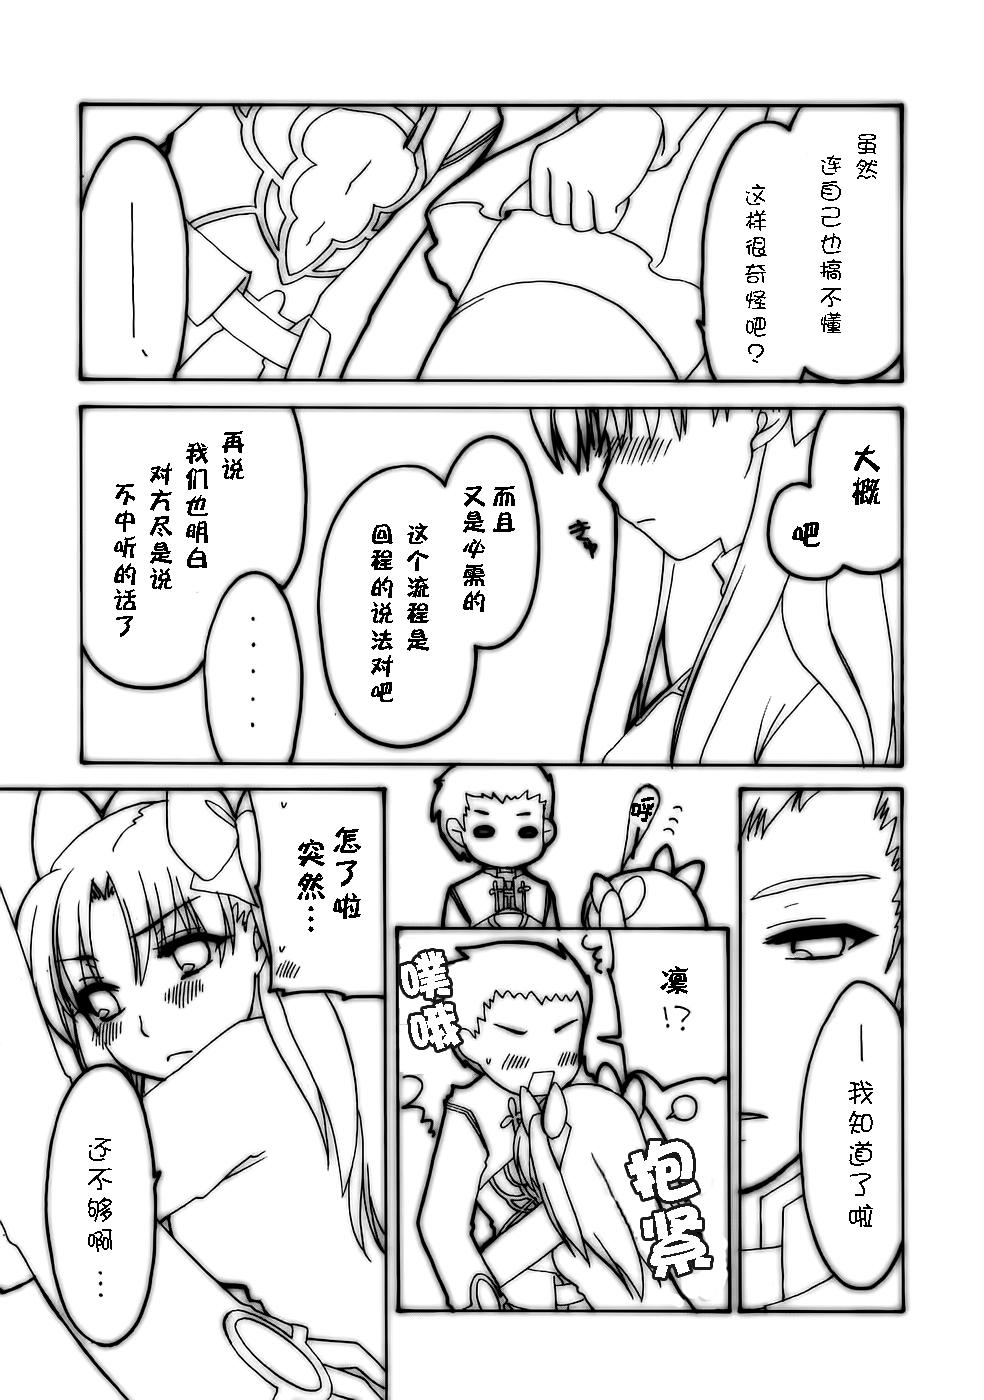 Piercings Shrouded in Red - Fate stay night Pareja - Page 10